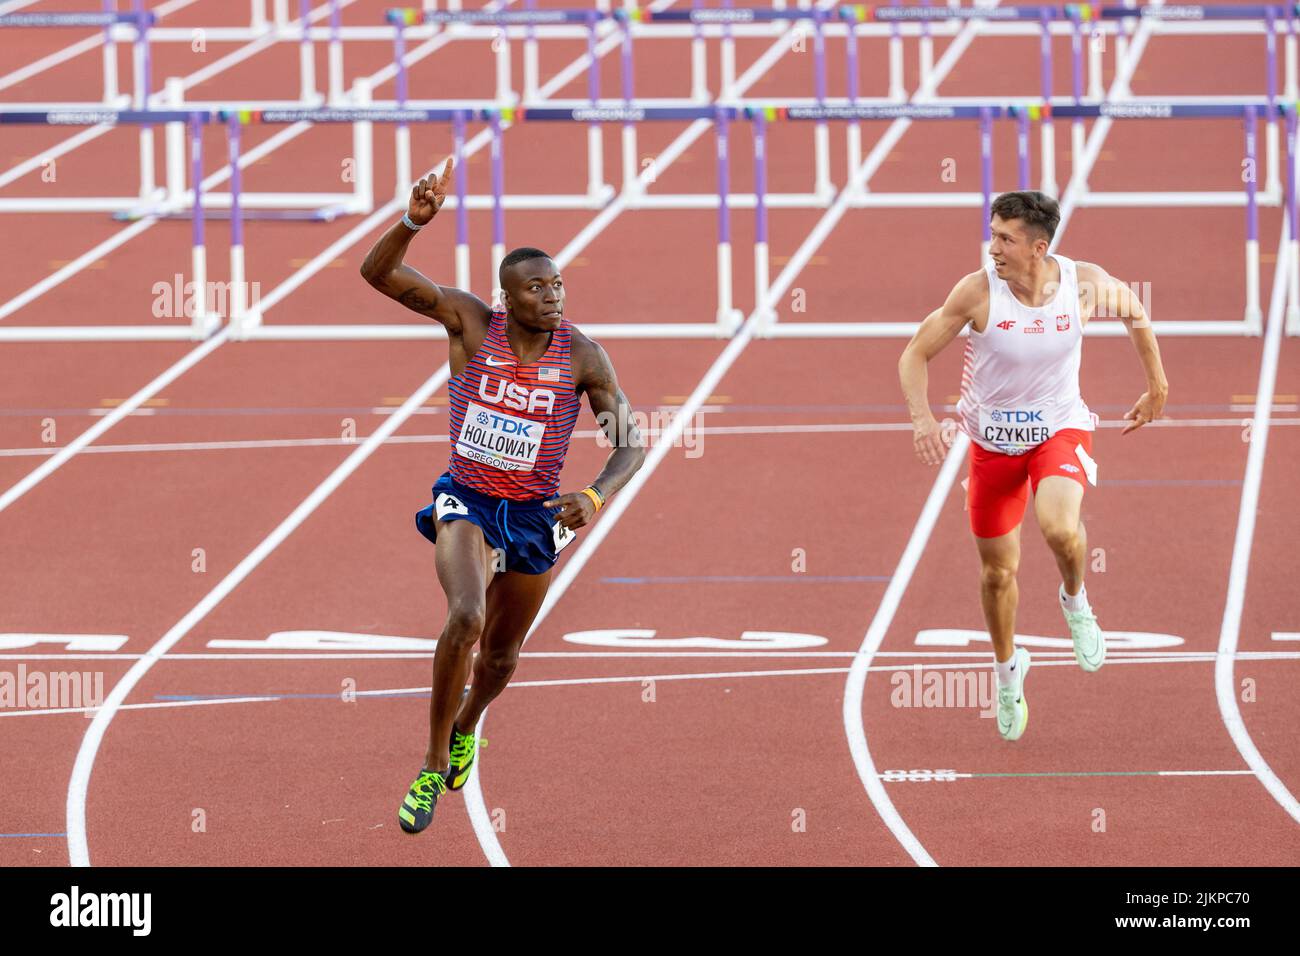 Grant Holloway (USA) celebrates becoming world champion in the 110 meter hurdles in a time of 13.03 during the afternoon session on day 3 of the World Stock Photo